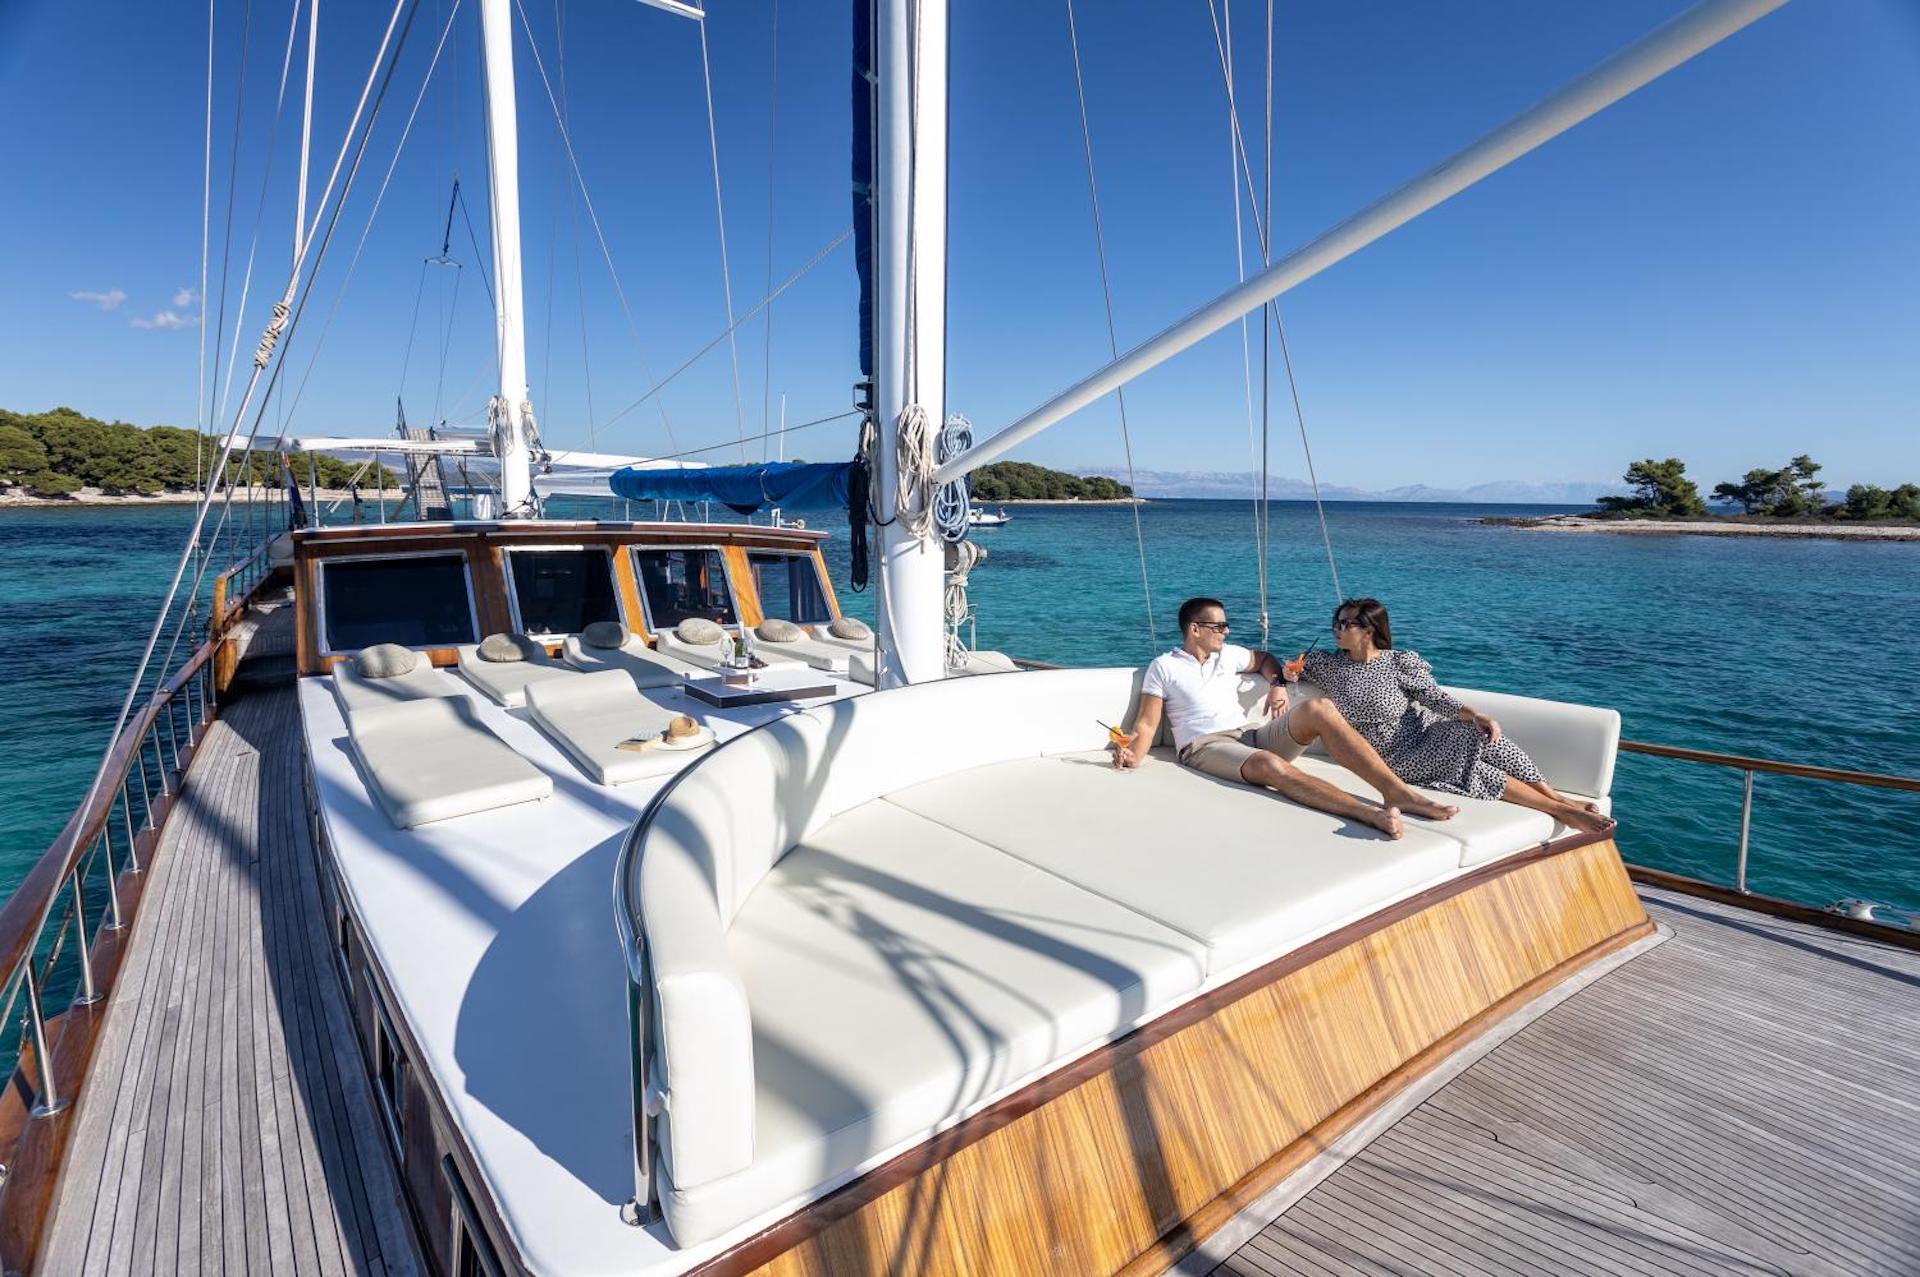 yacht charter Andi Star relaxing